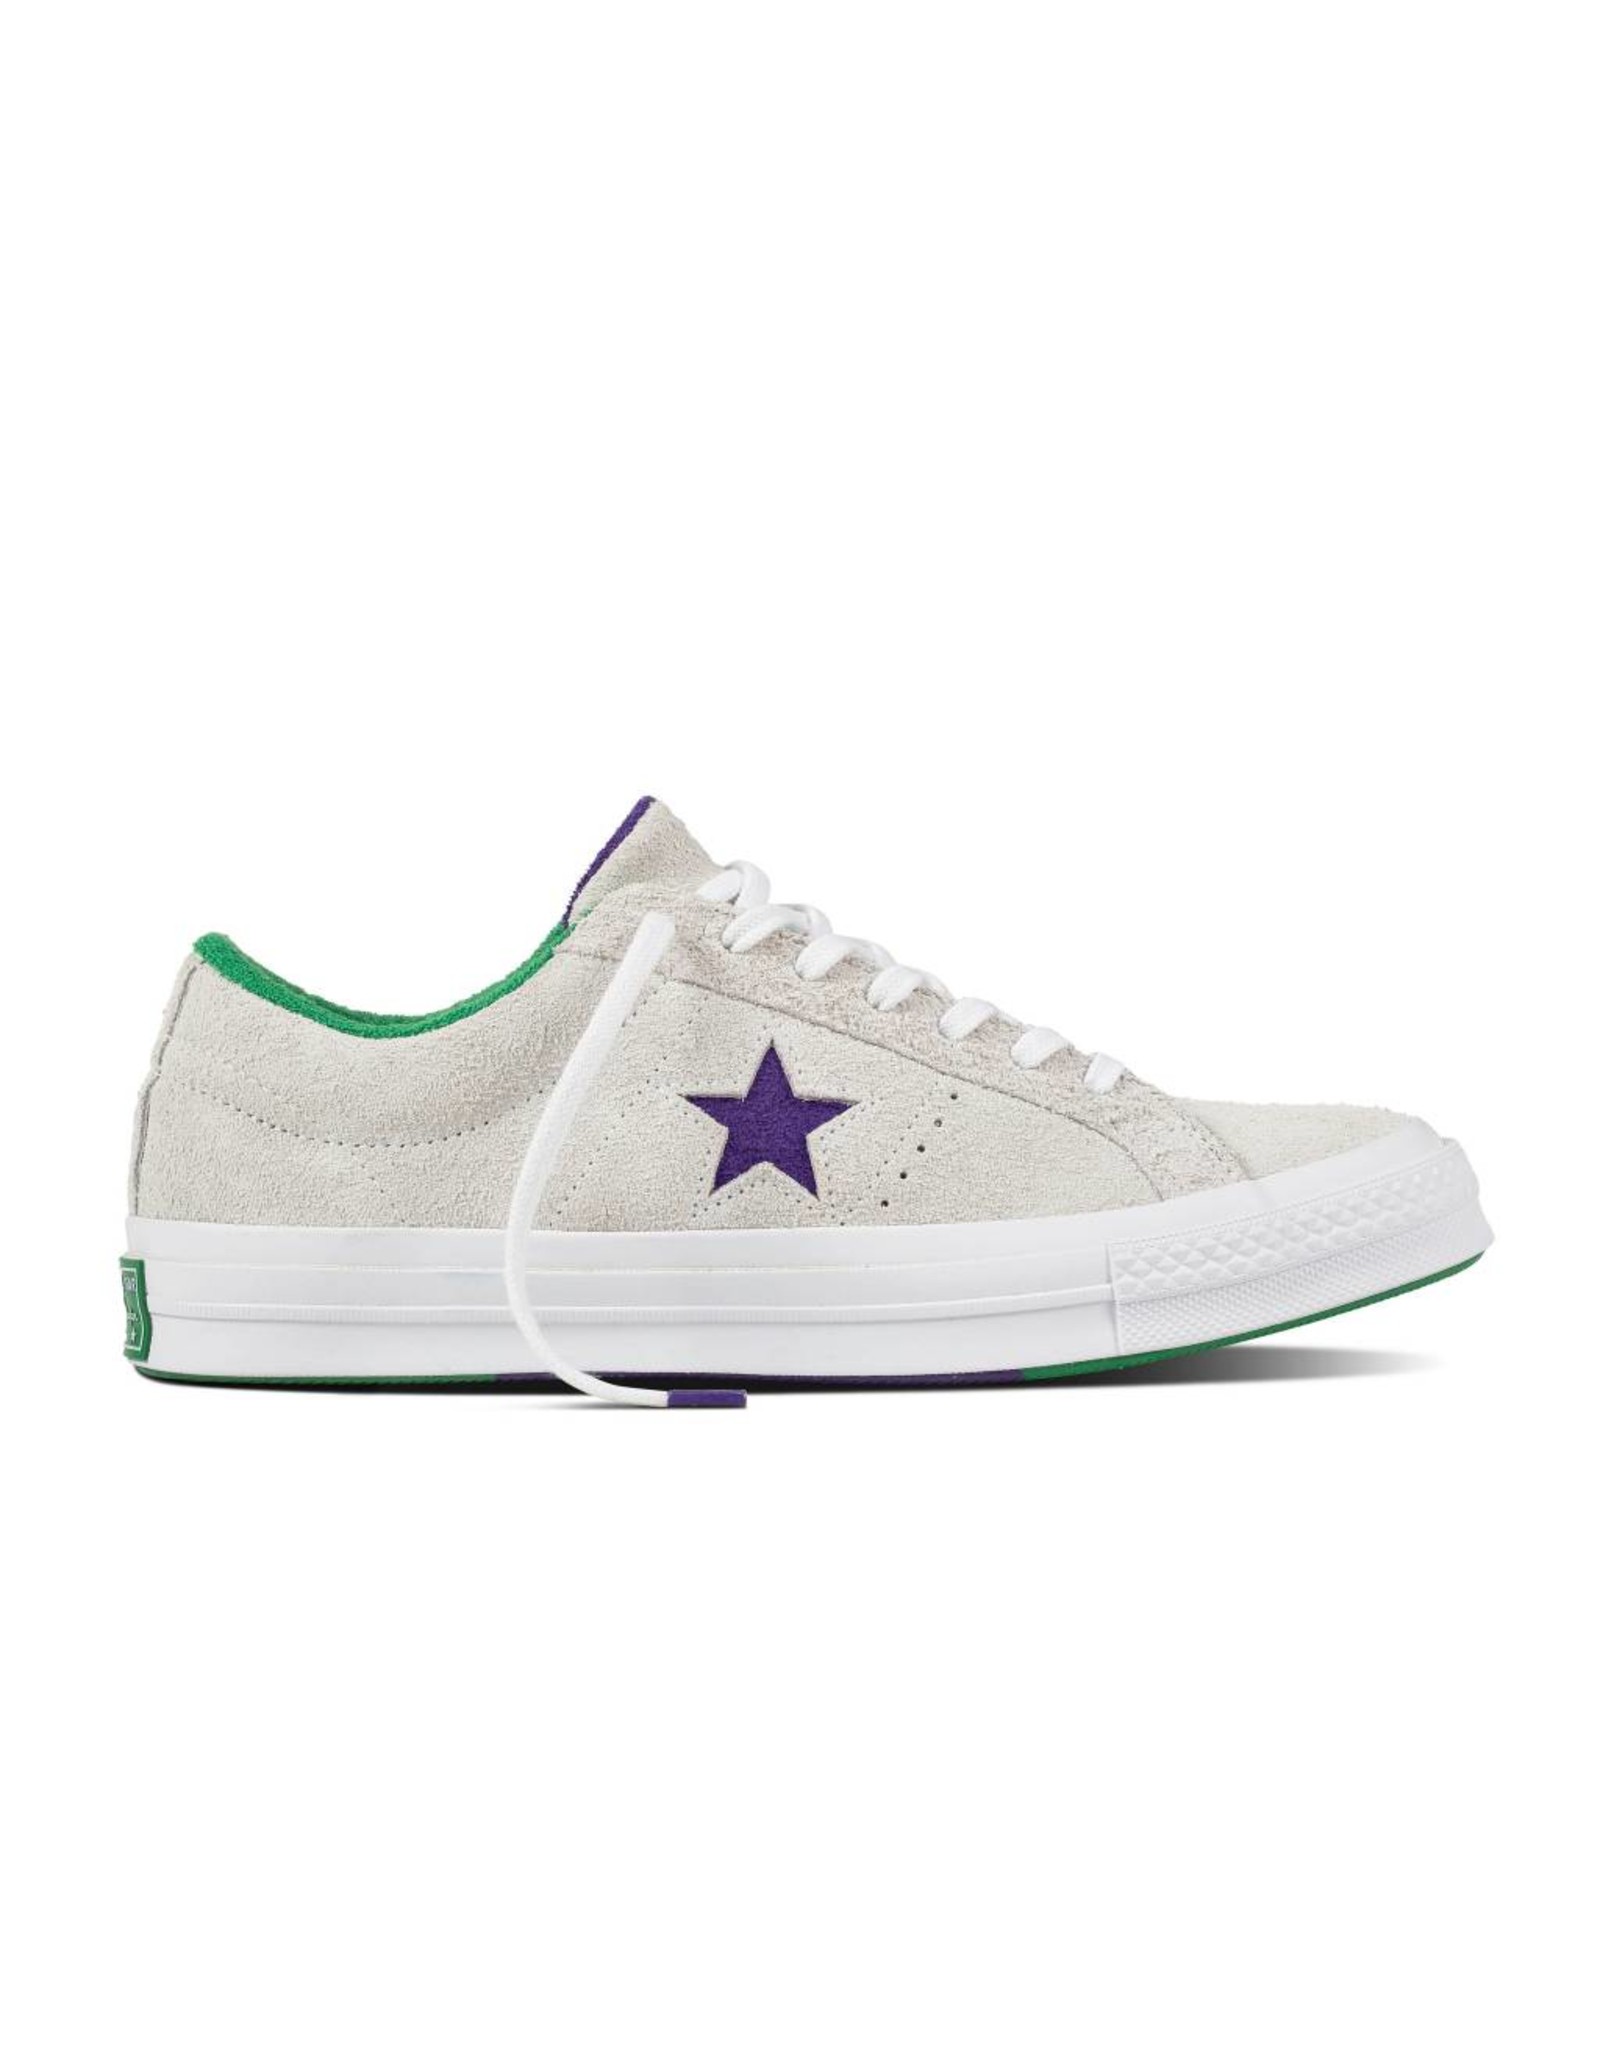 green suede converse one stars